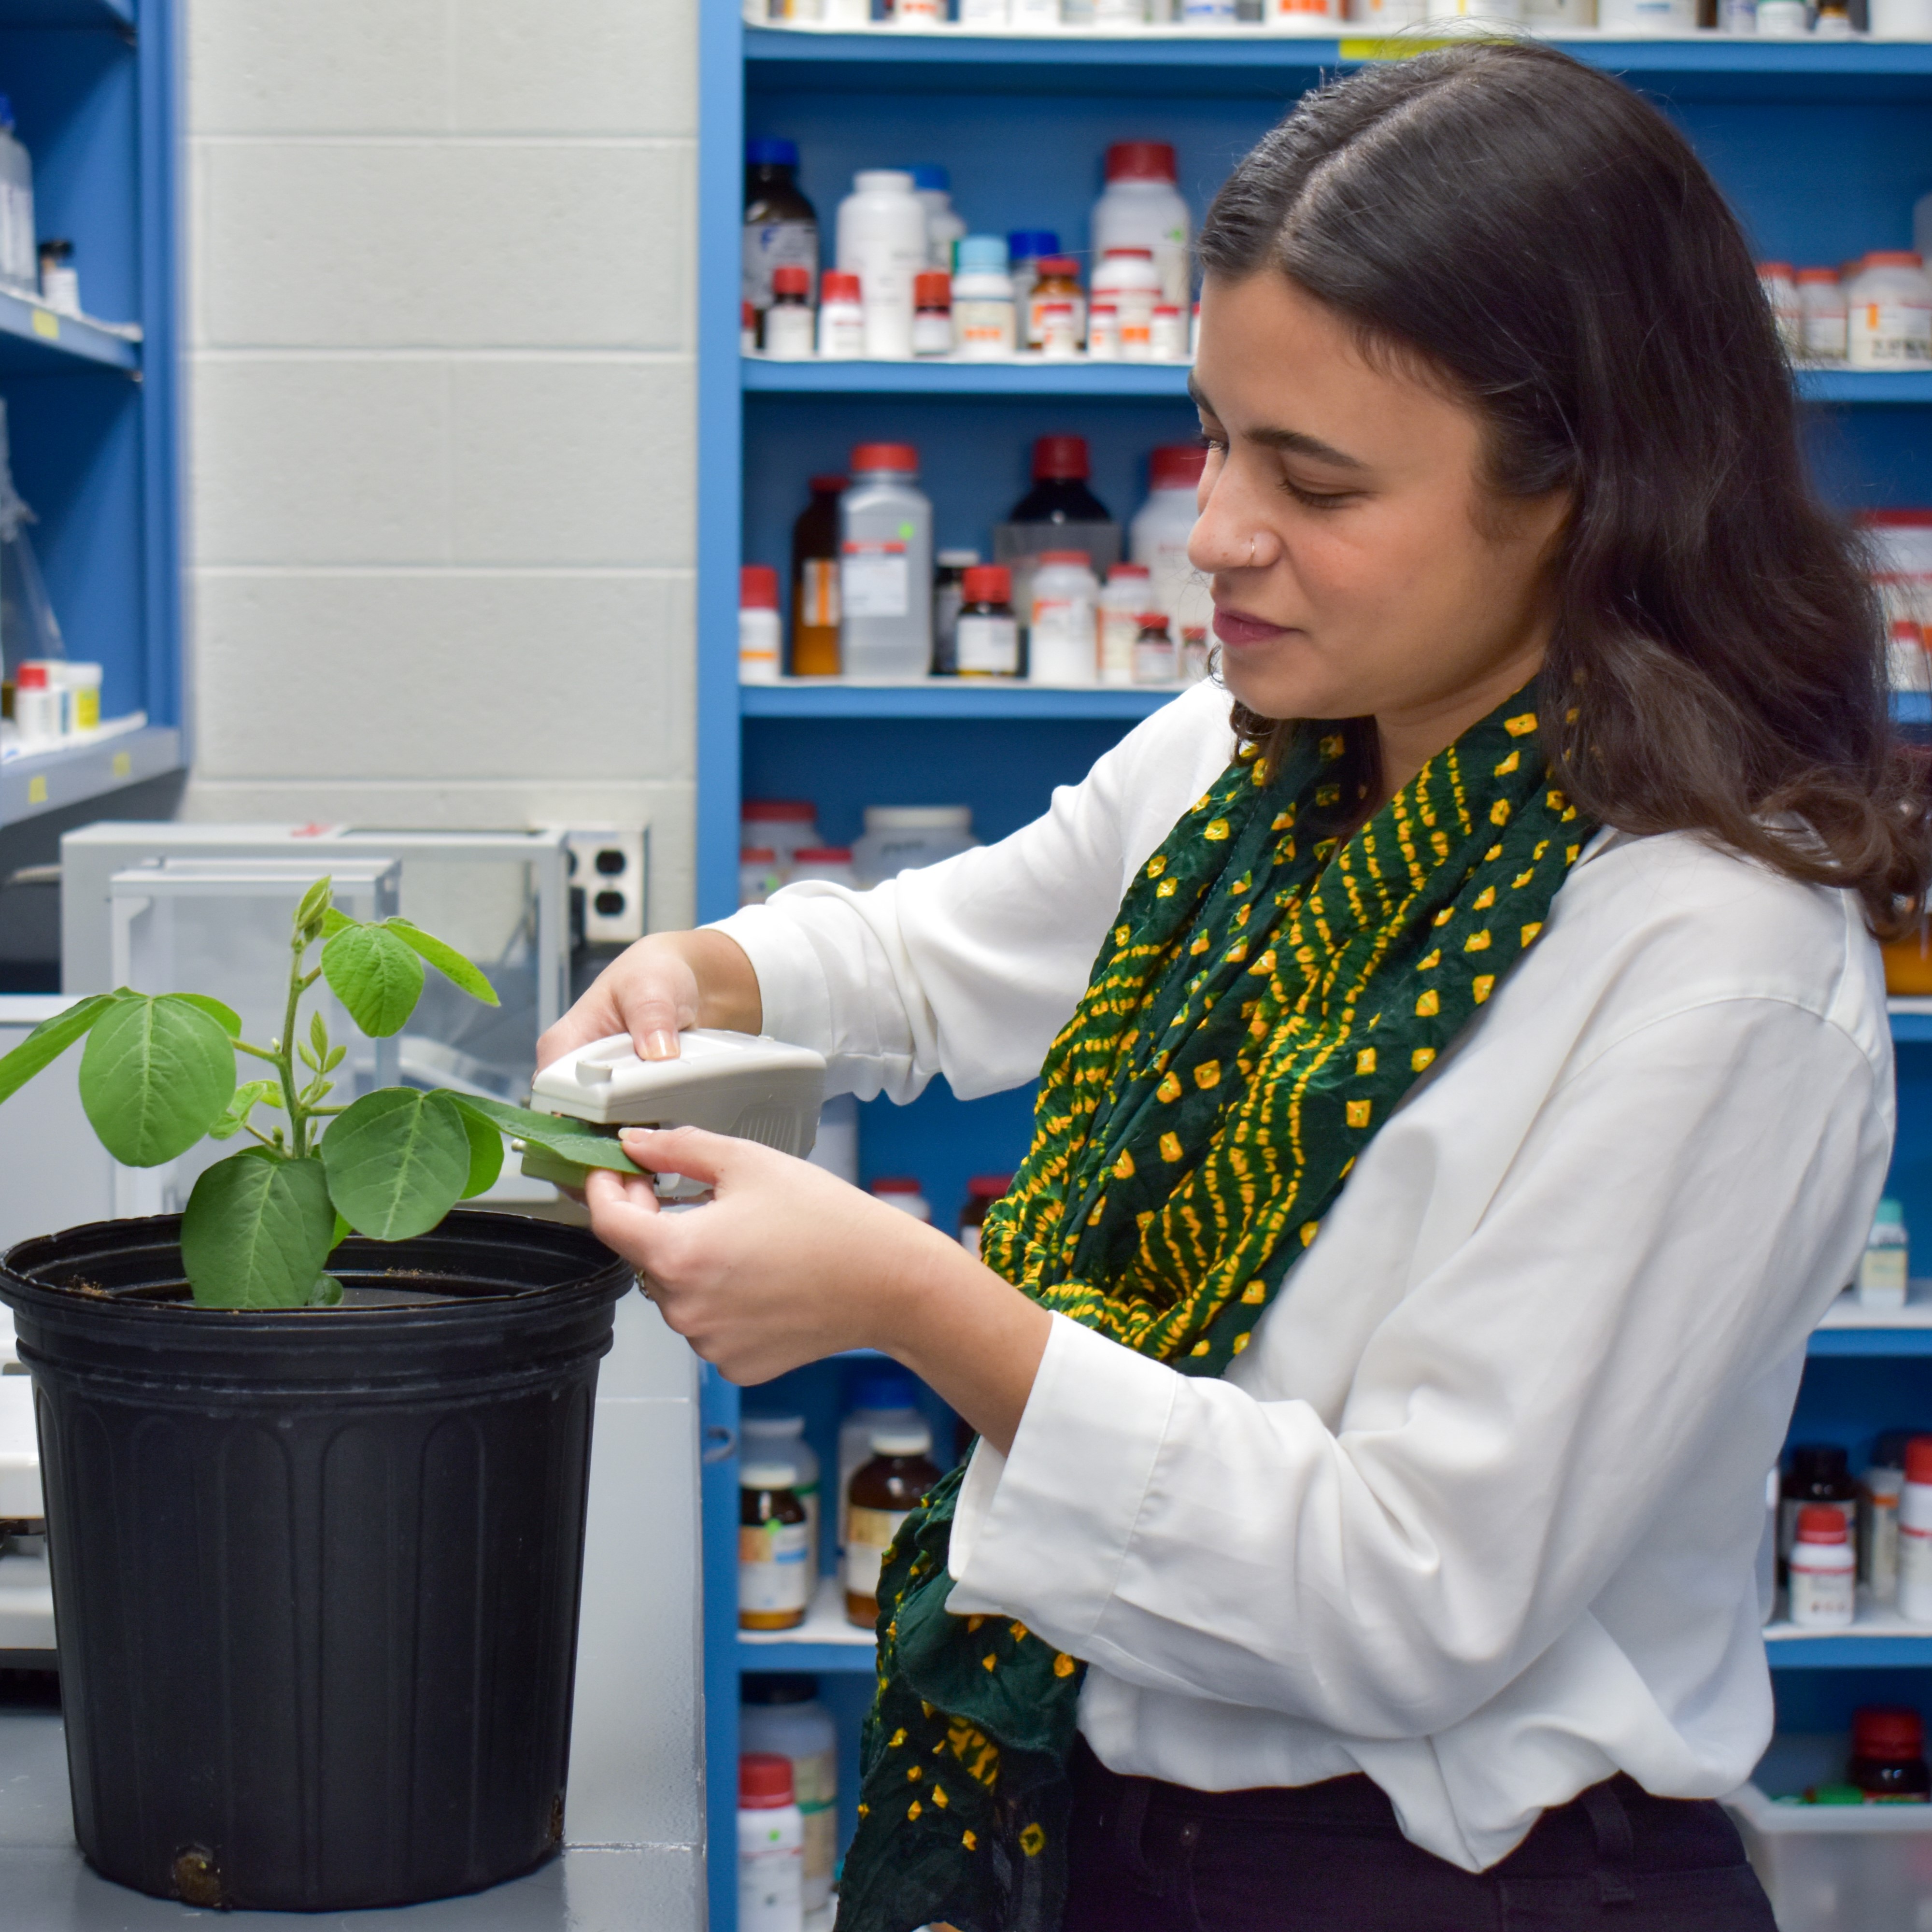 A person works with a plant in the lab